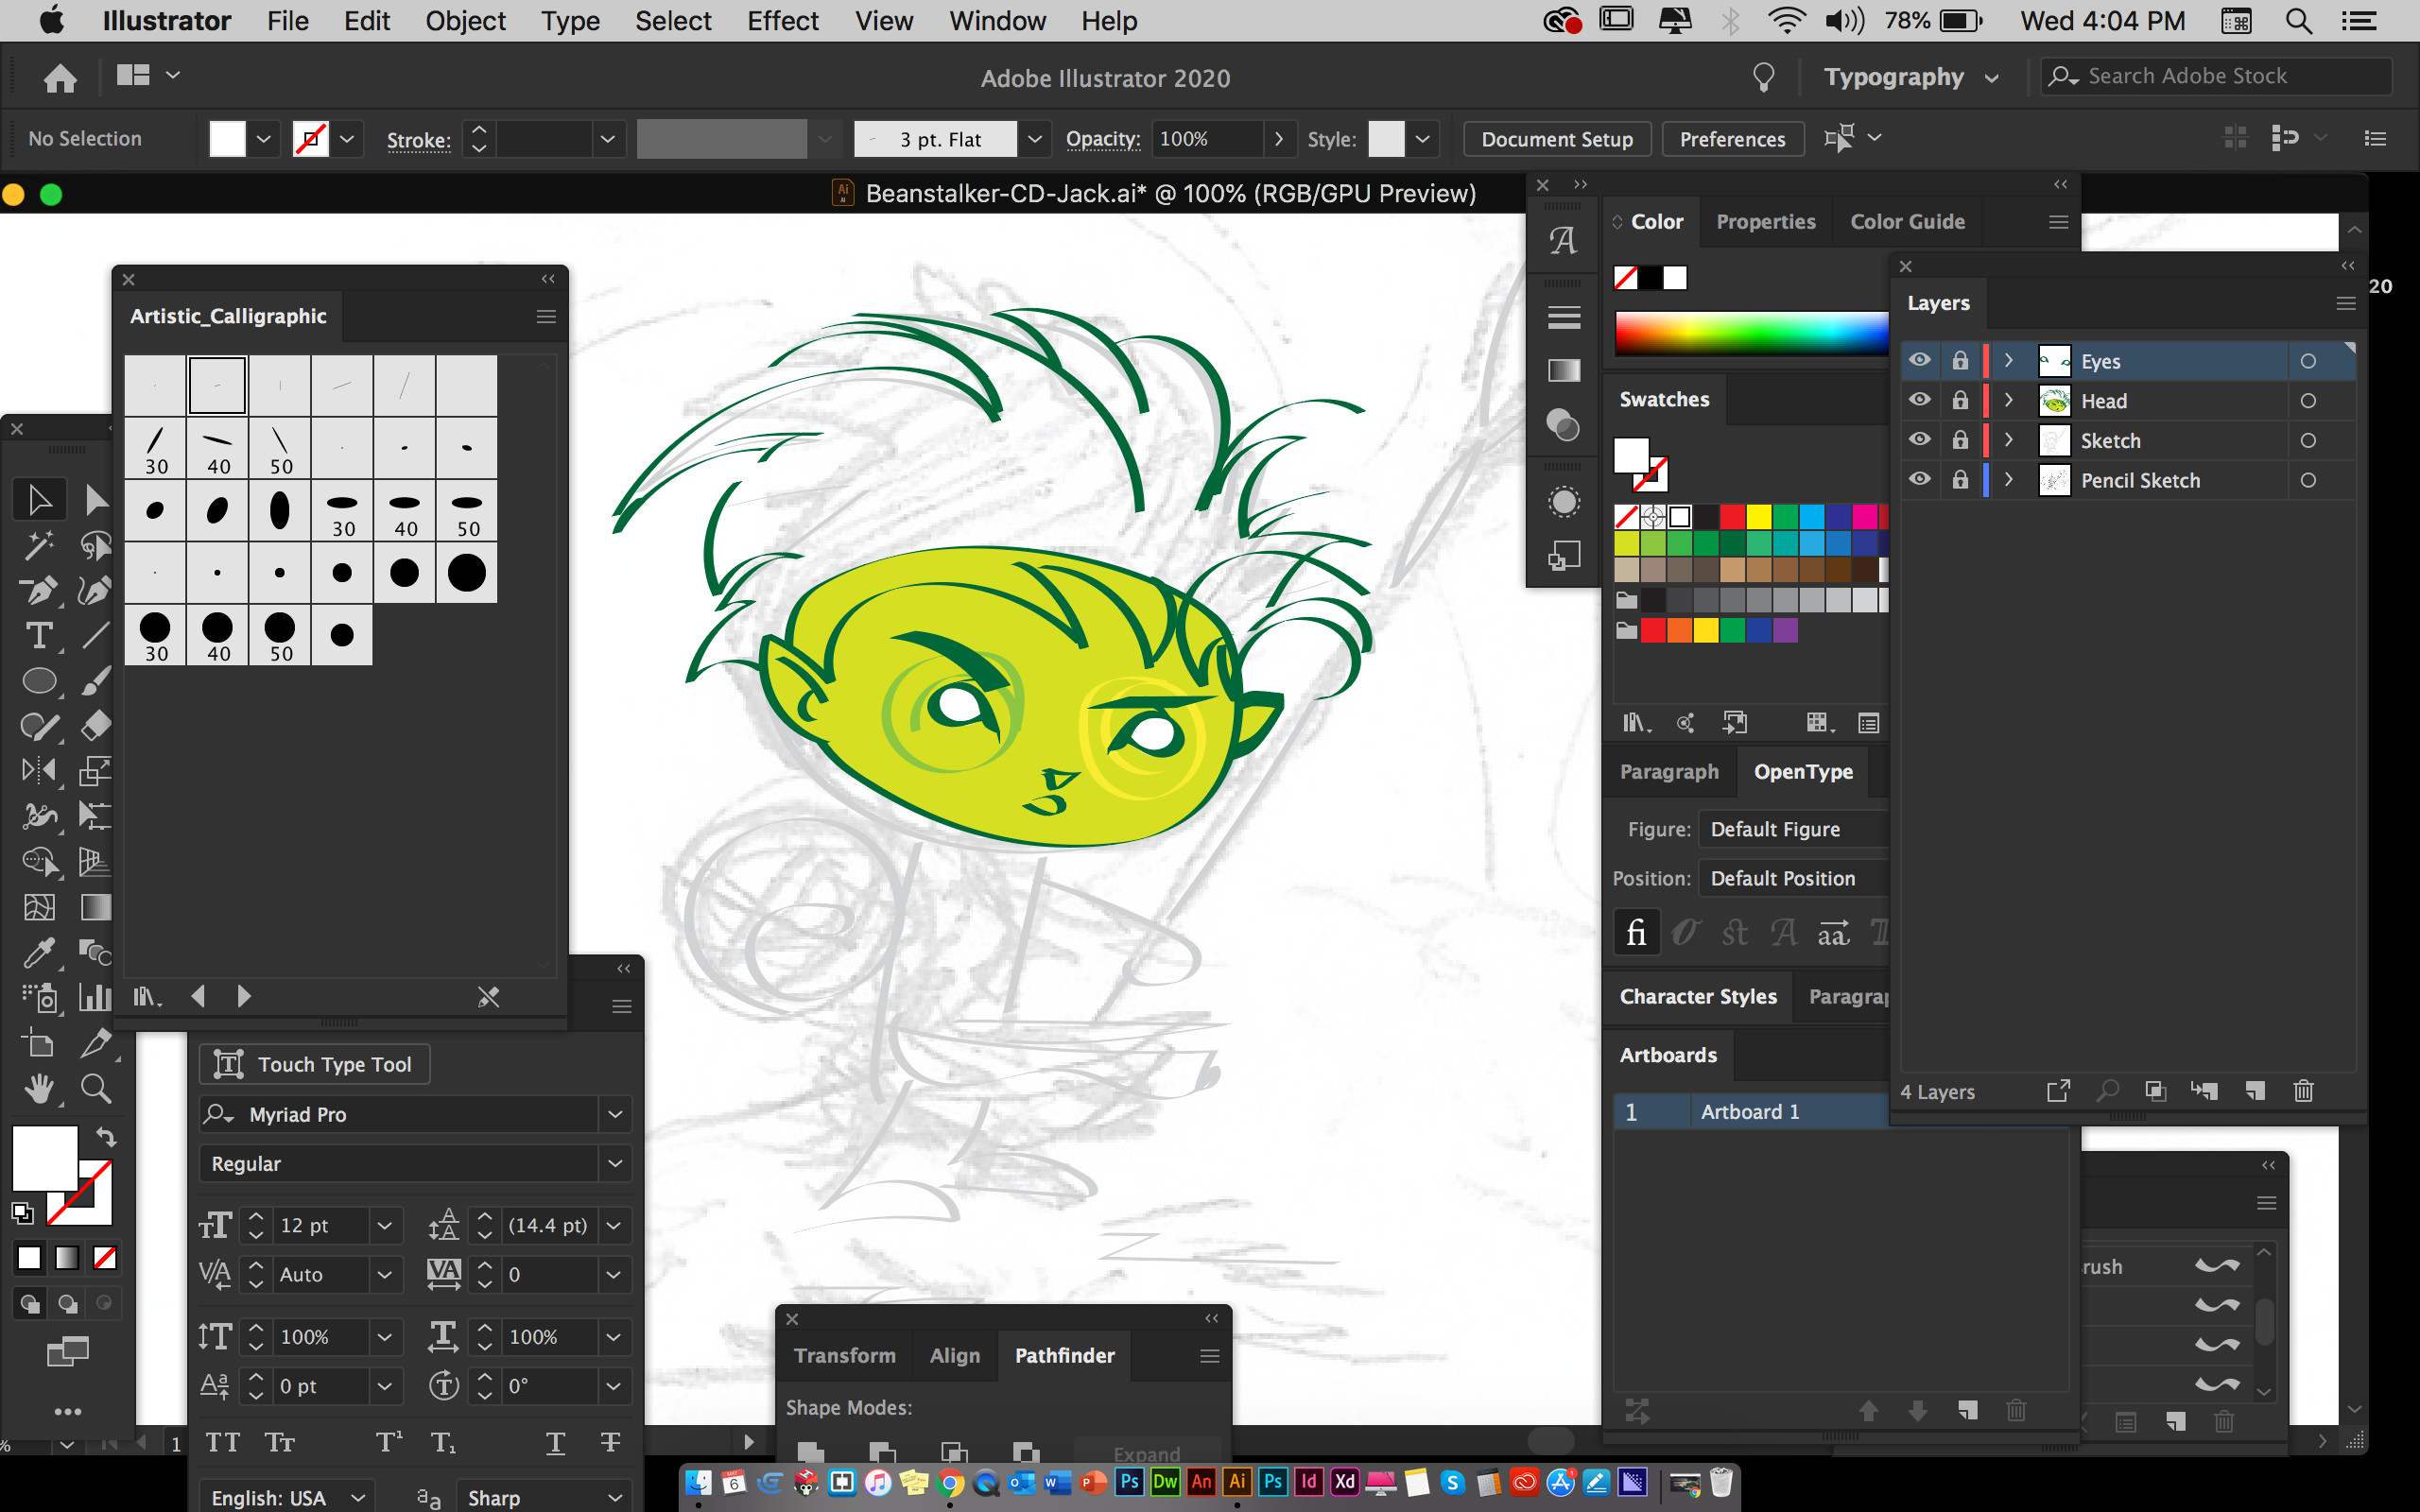 Refining the character.... Green, nah.